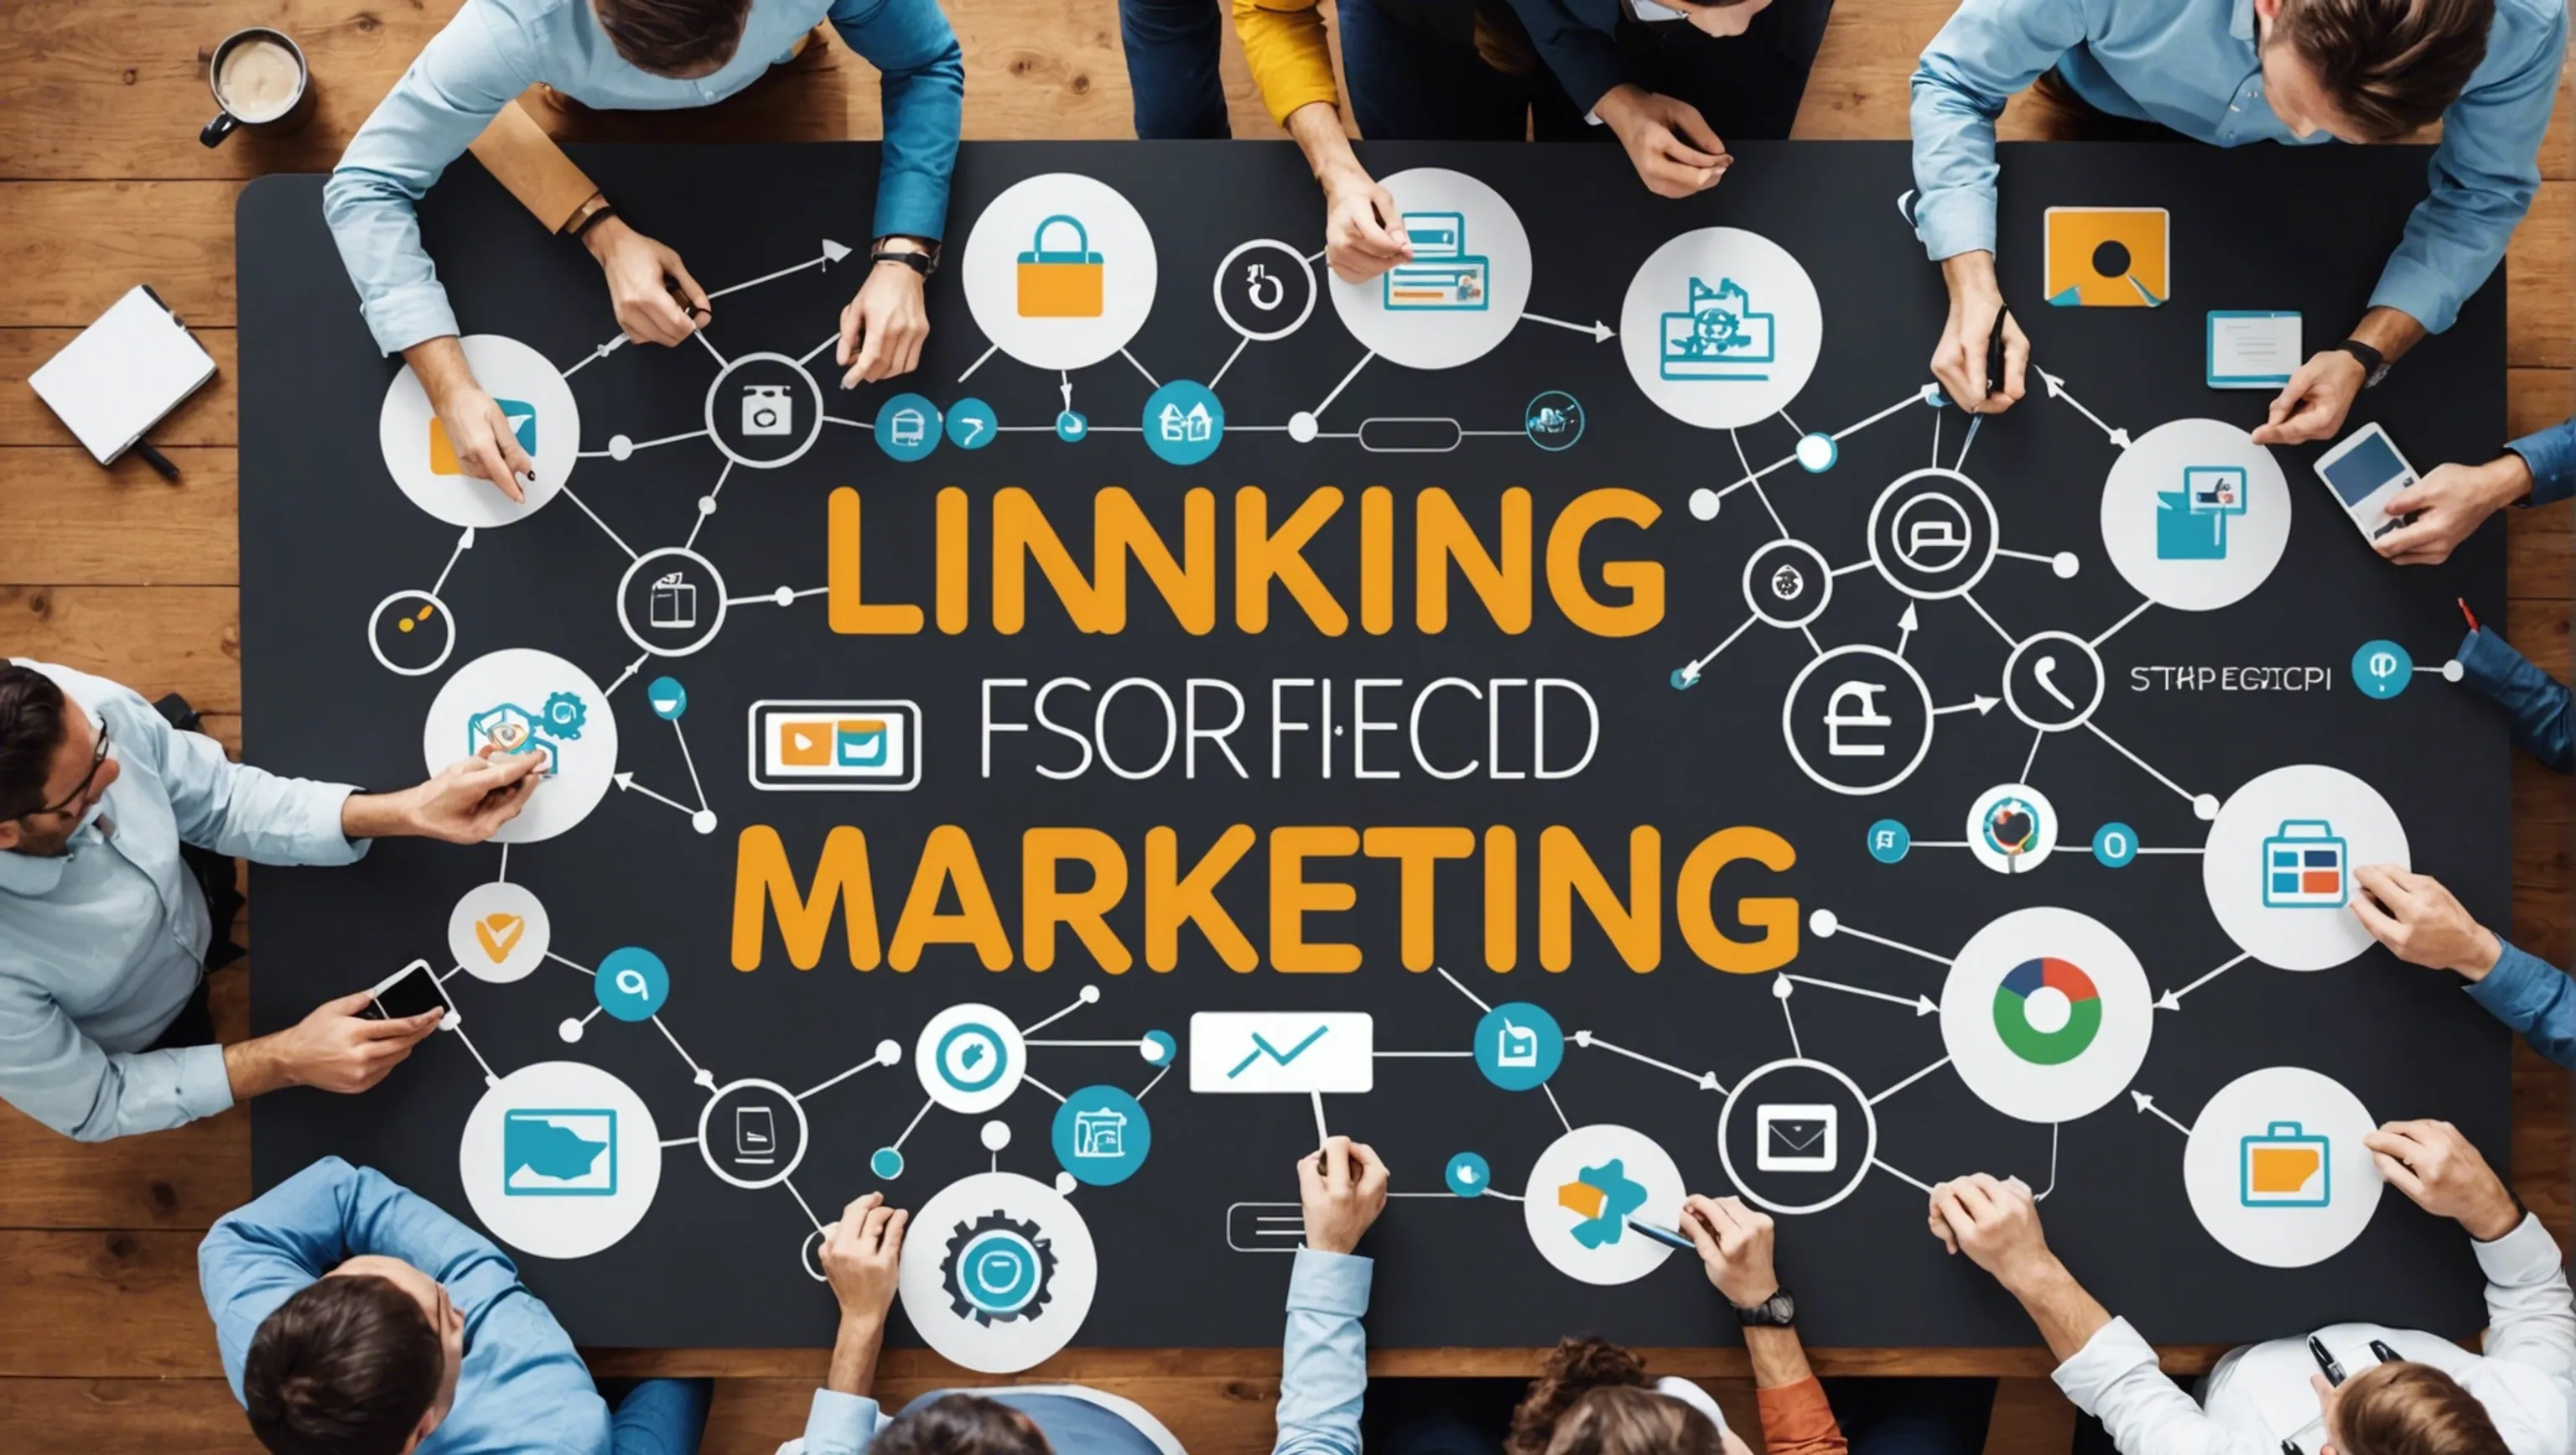 Linking for SEO in marketing